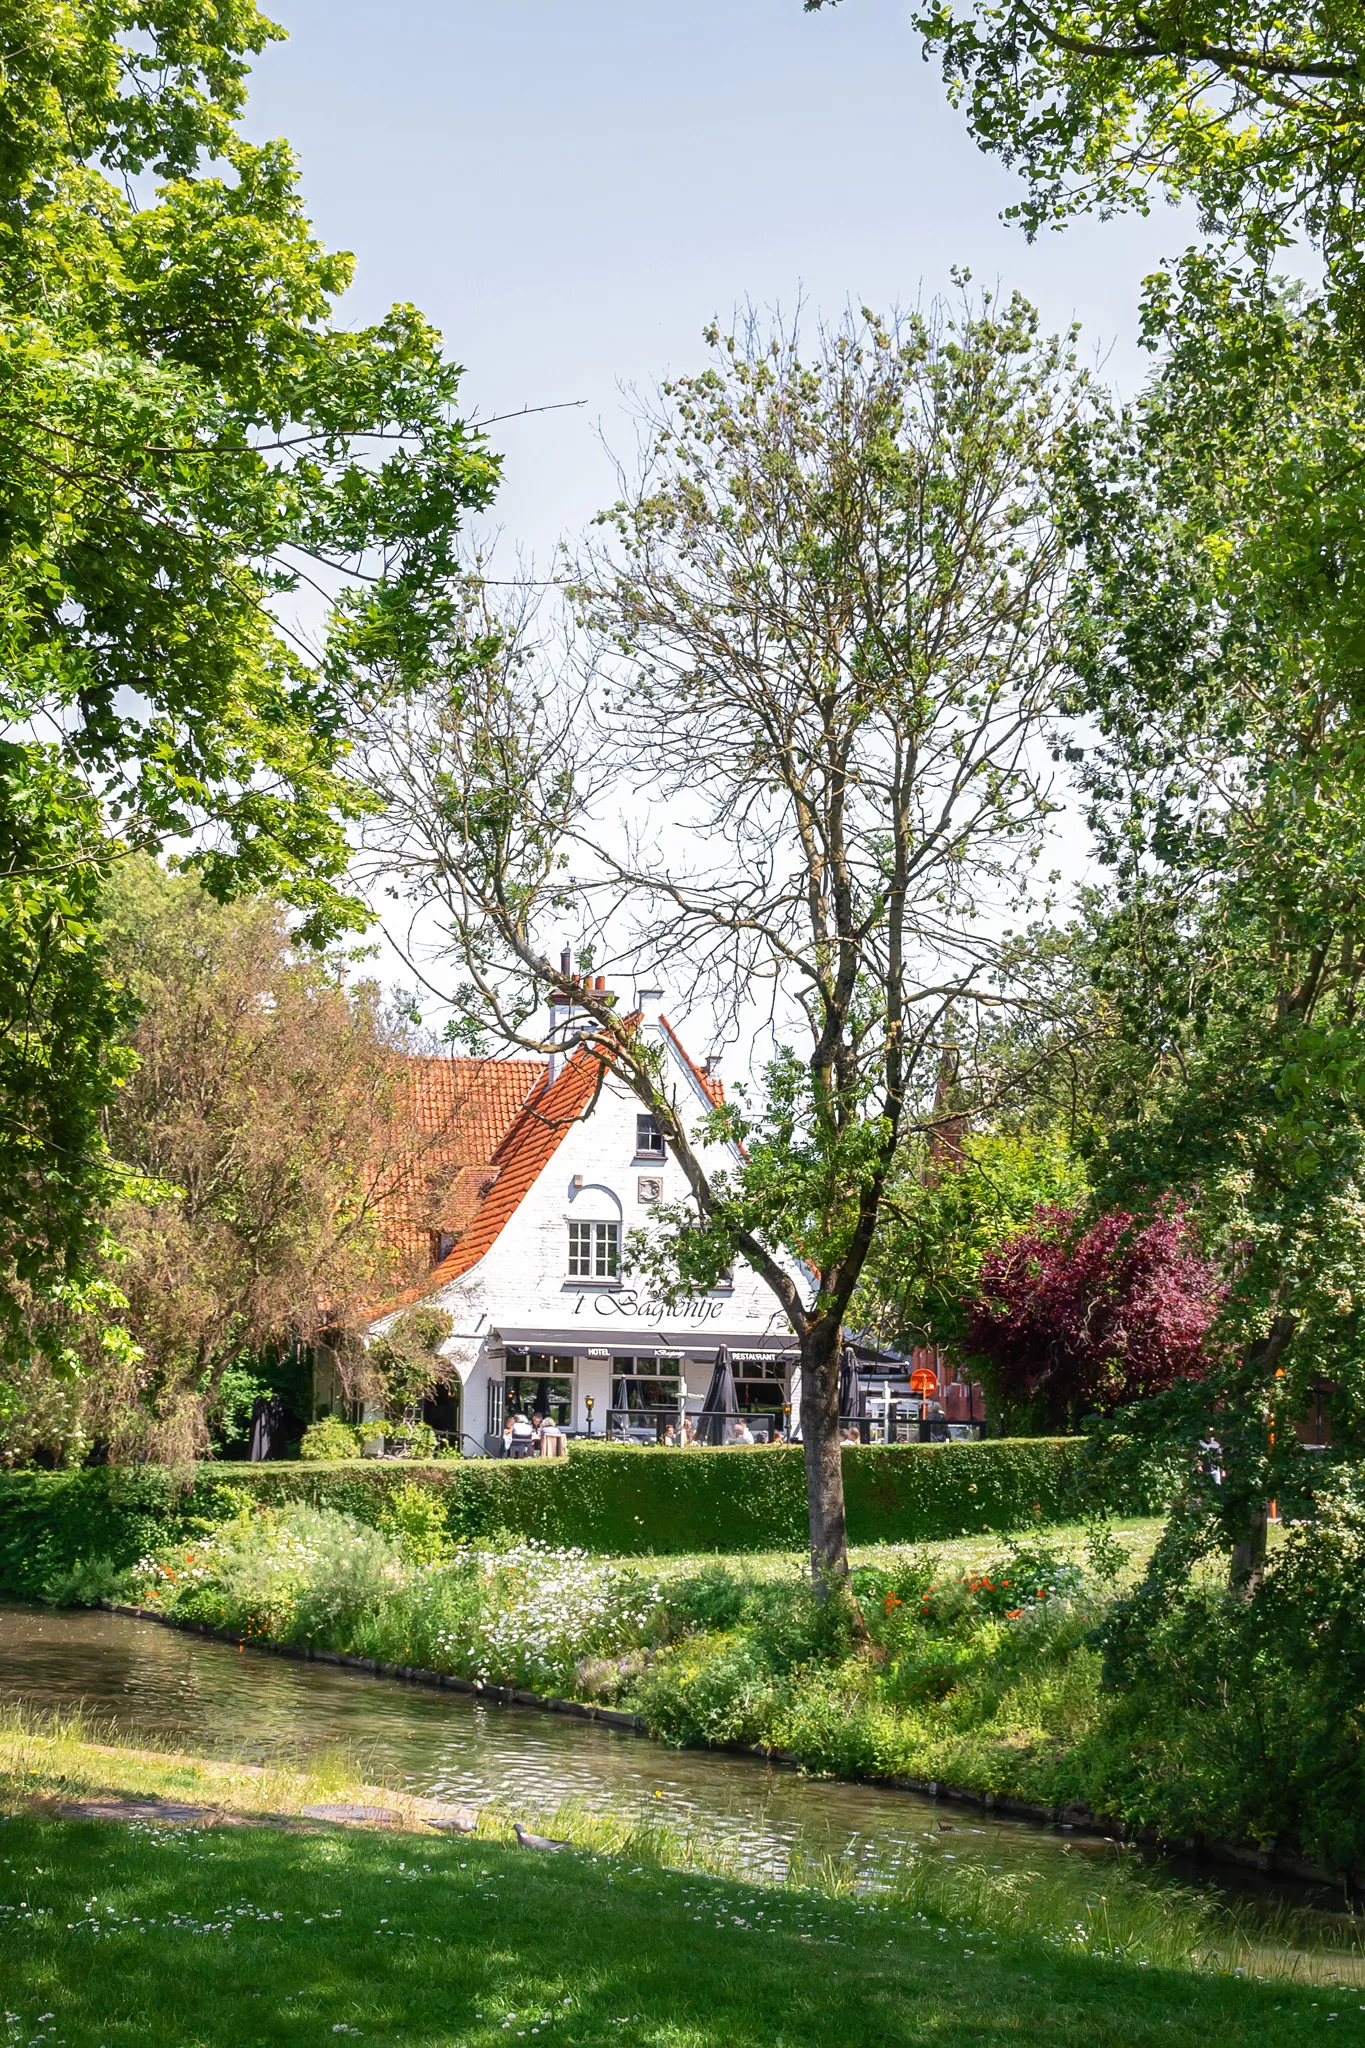 A white cottage restaurant in Bruges, Belgium with green trees